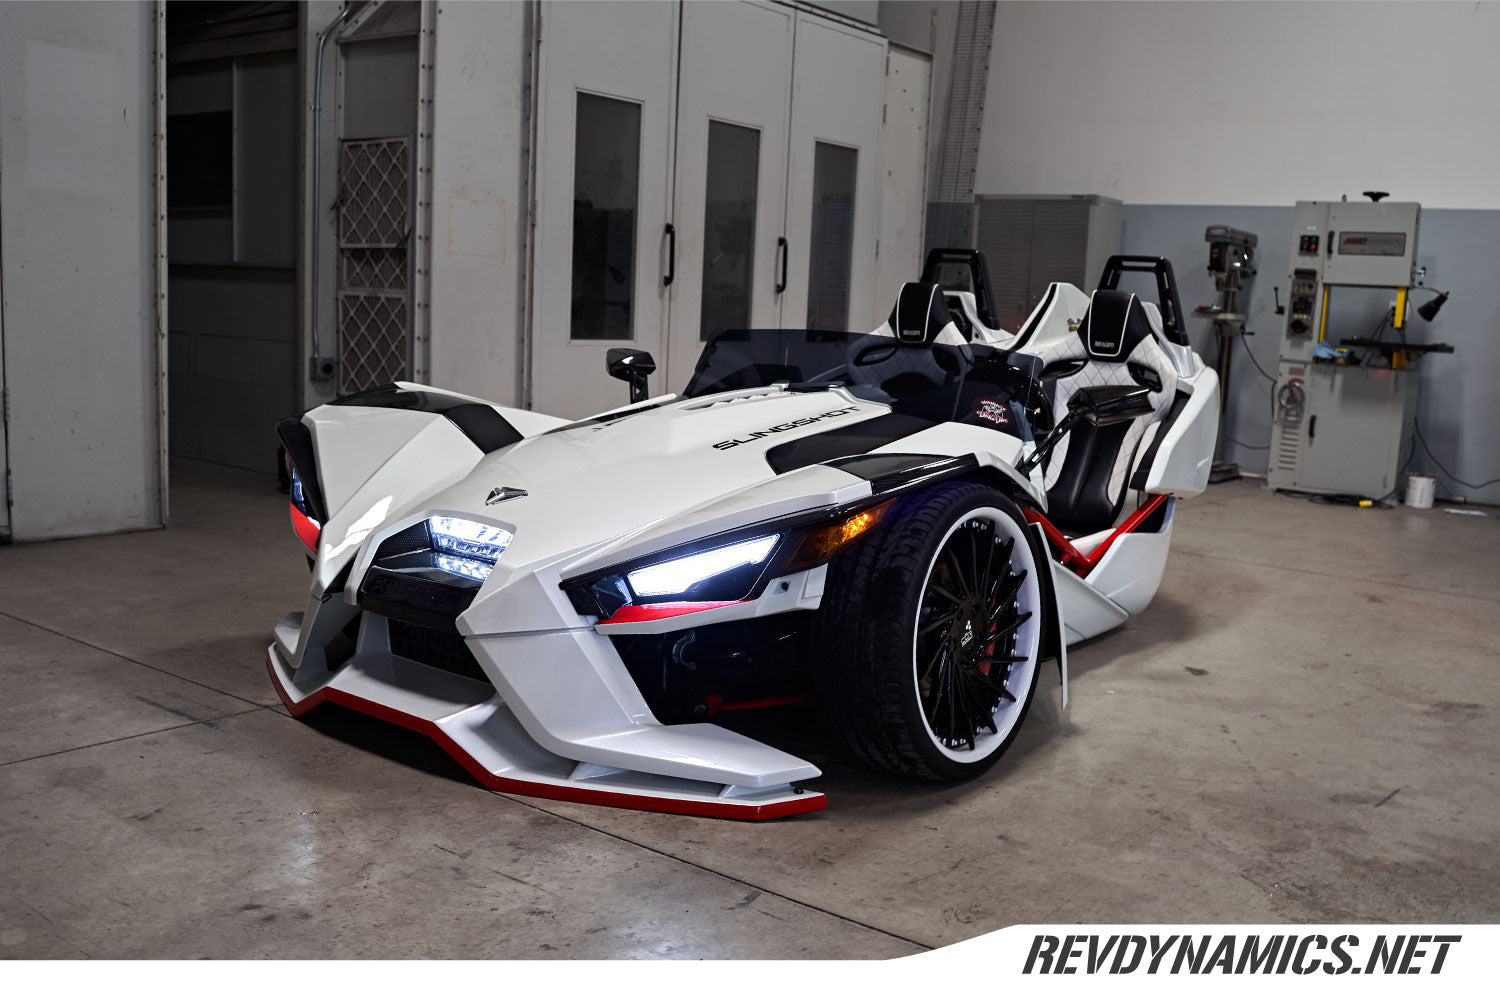 2016 Polaris Slingshot SL Pearl White with Air Suspension and Custom Wheels